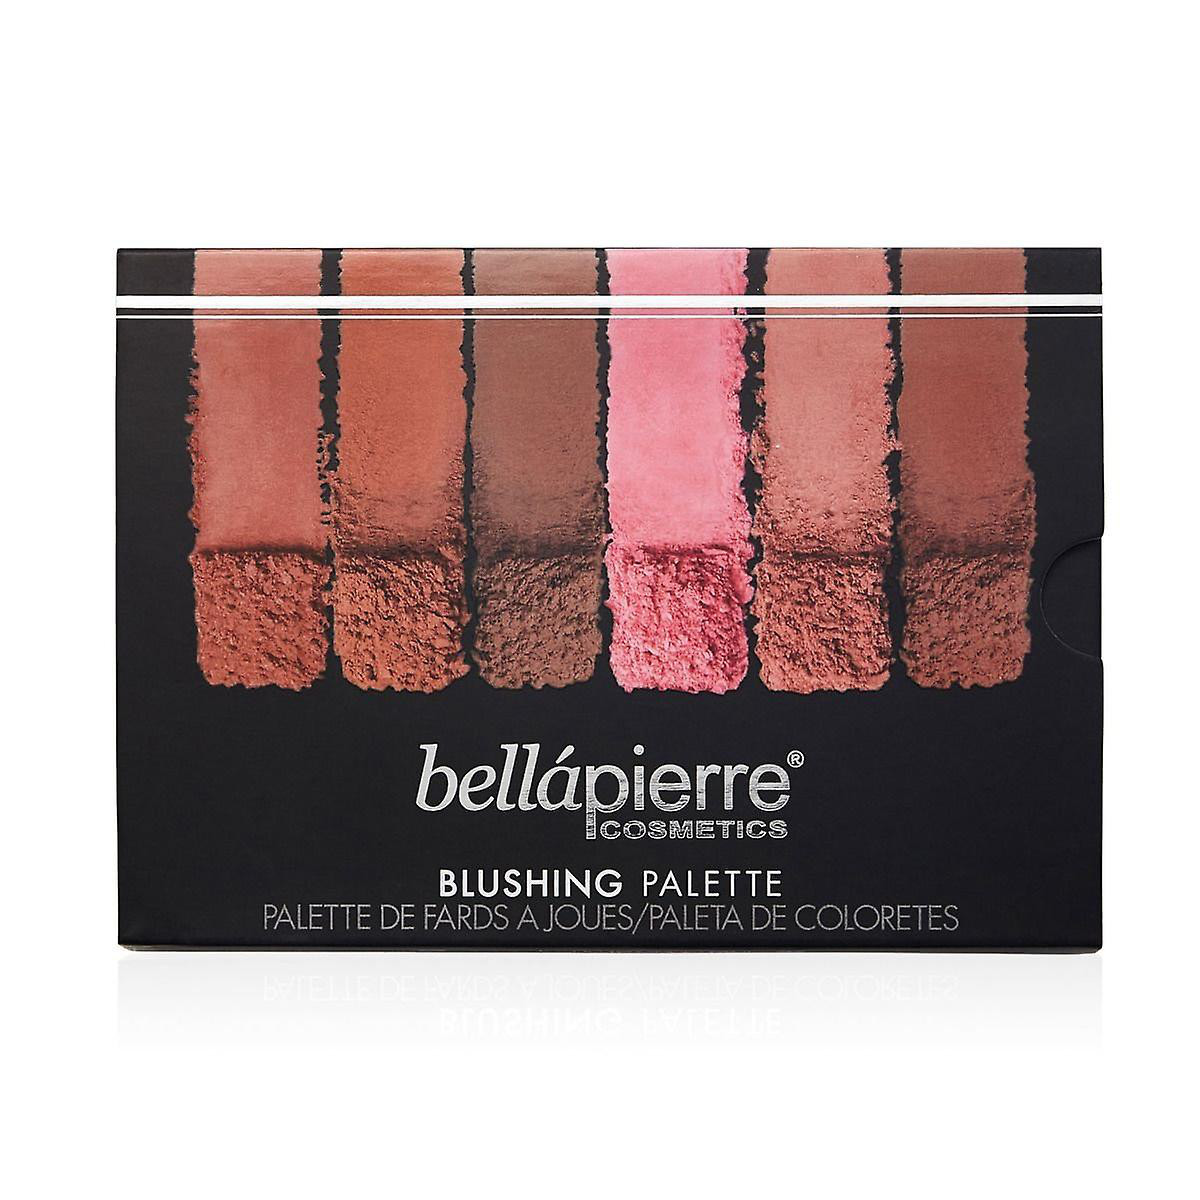 Blushing Palette 6 colors closed